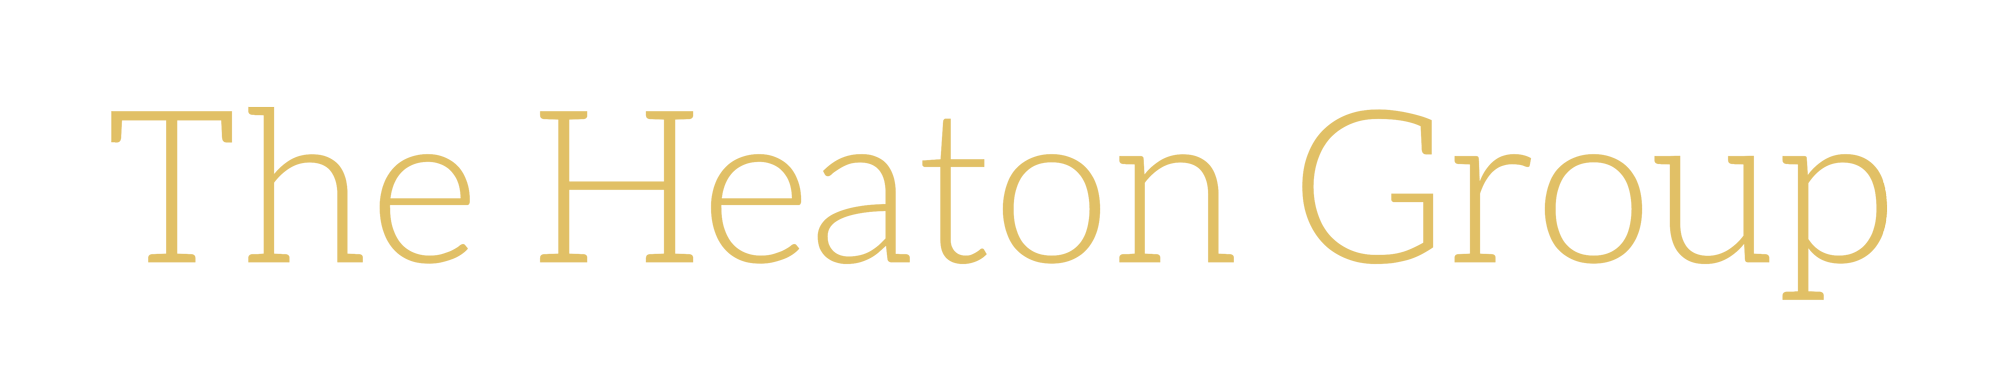 yellow-heaton-group-text-for-logo-small